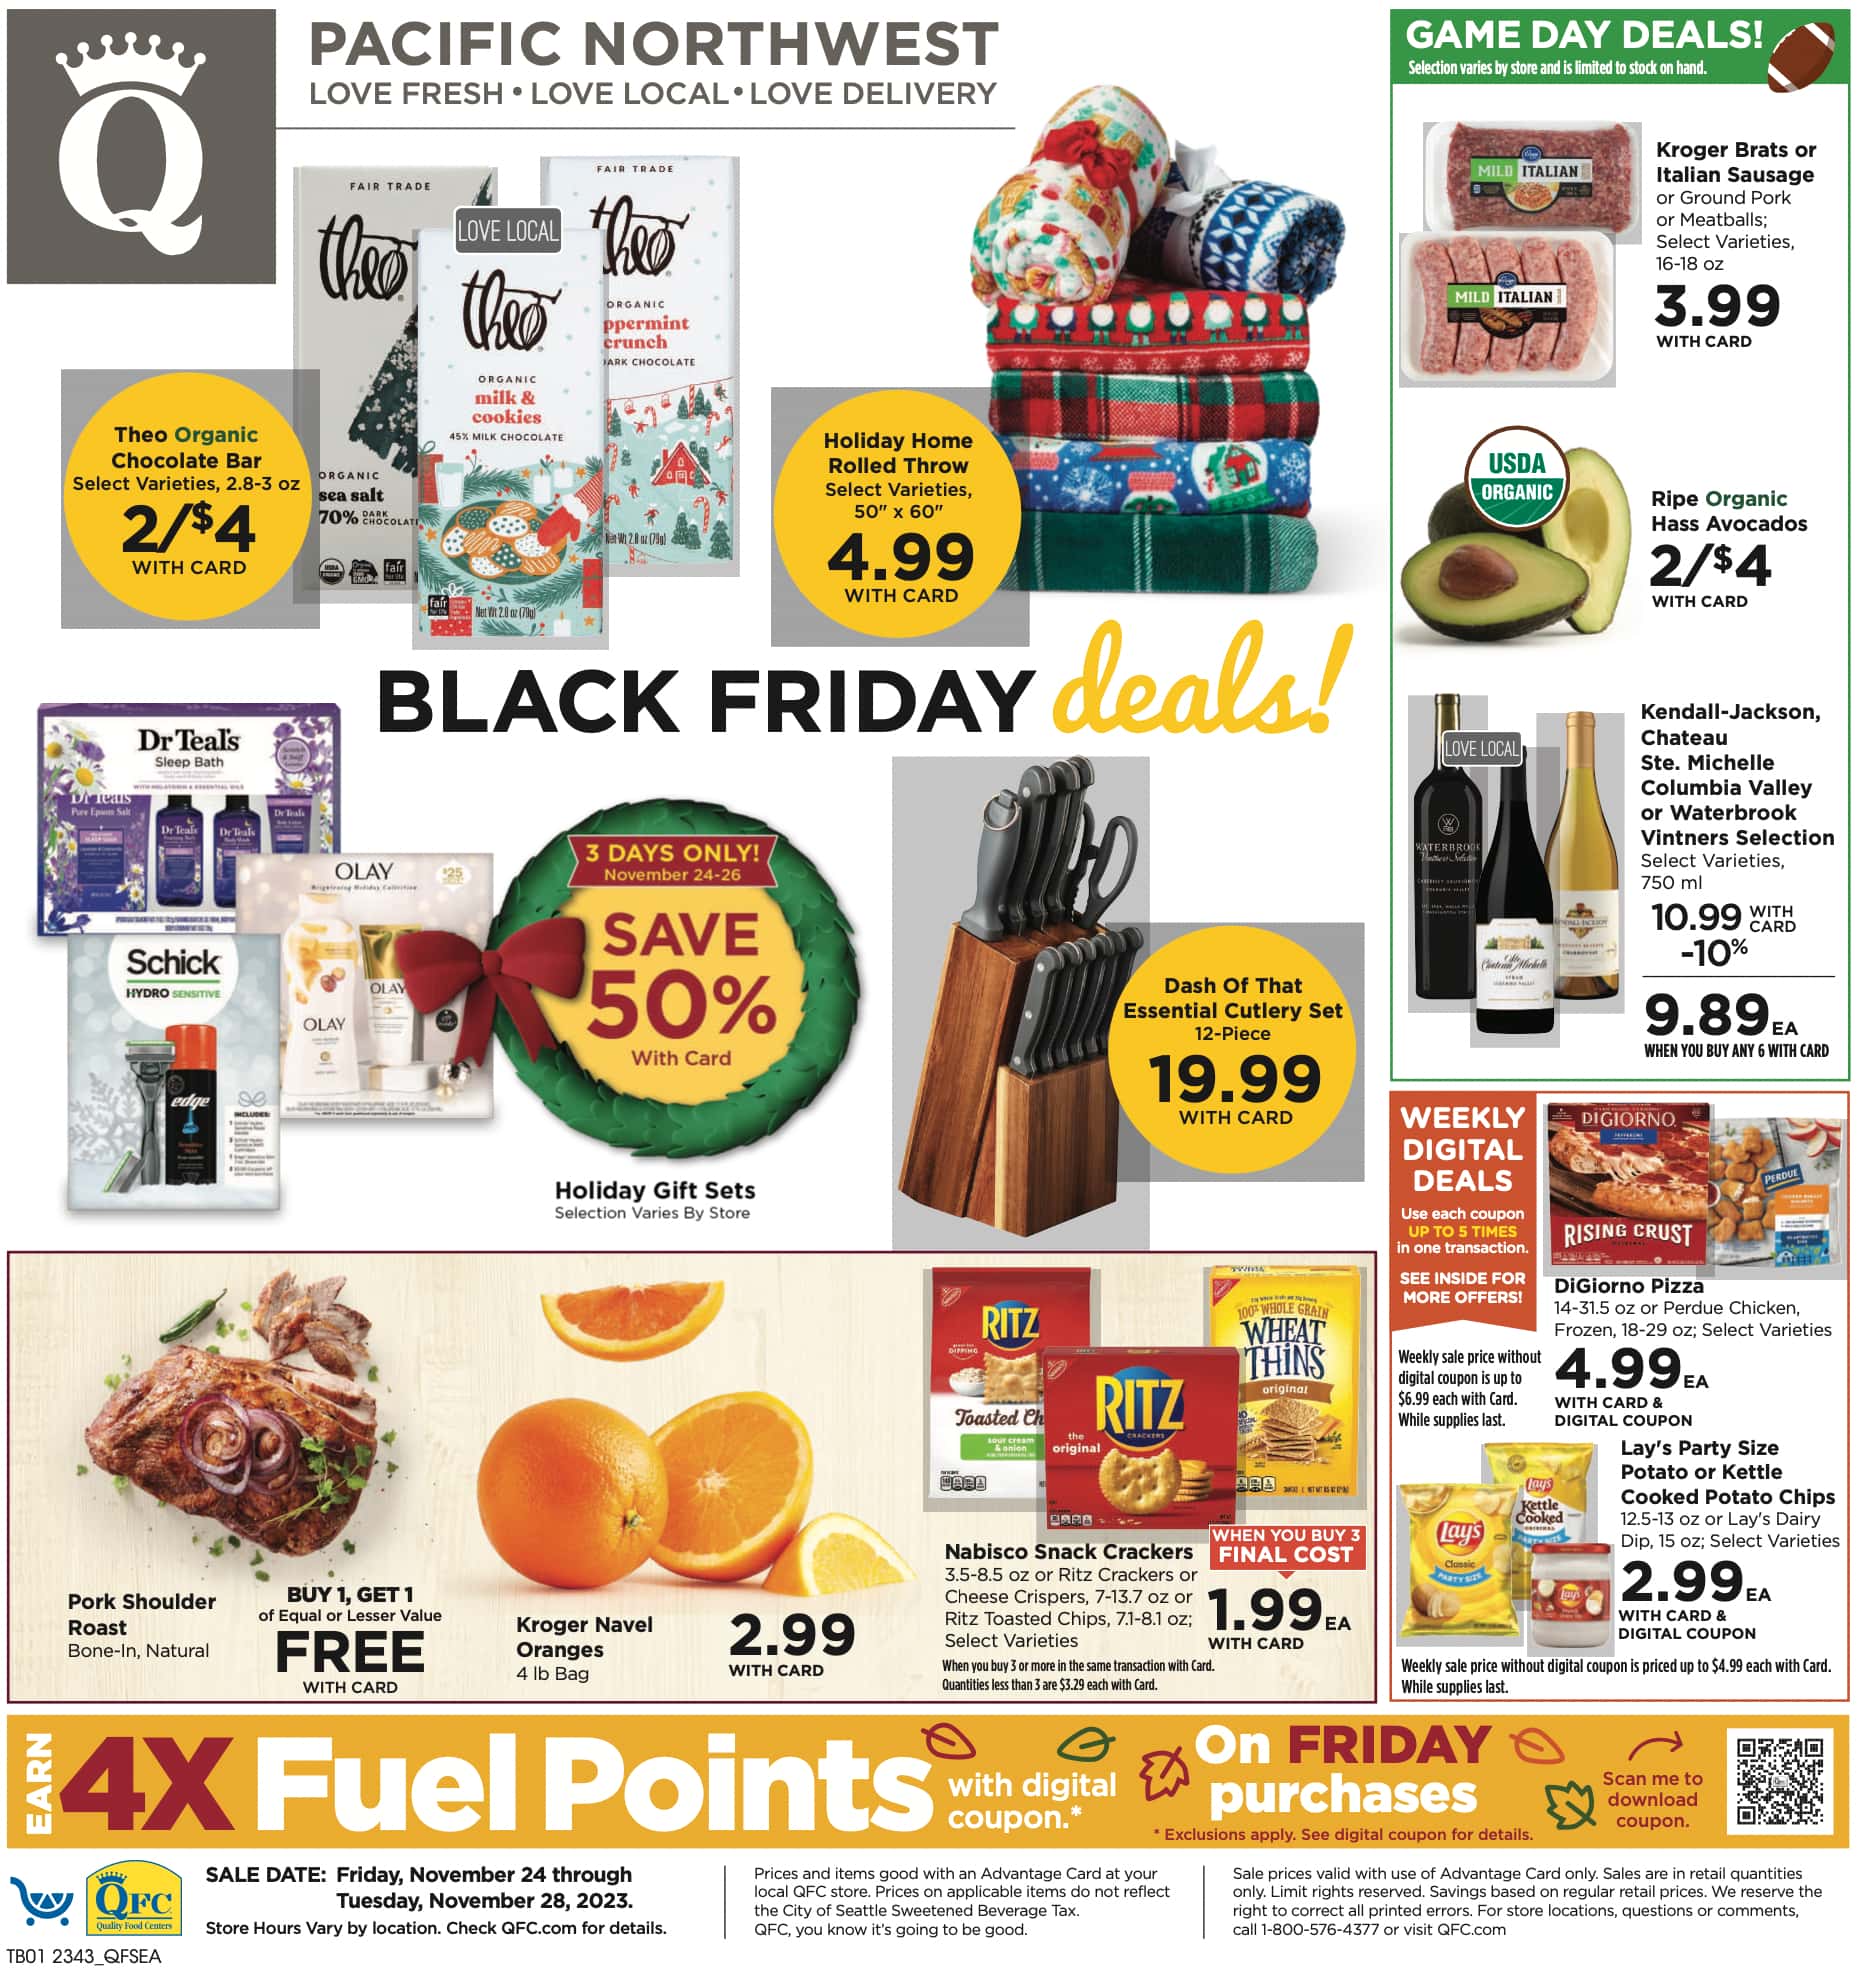 QFC Black Friday June 2024 Weekly Sales, Deals, Discounts and Digital Coupons.